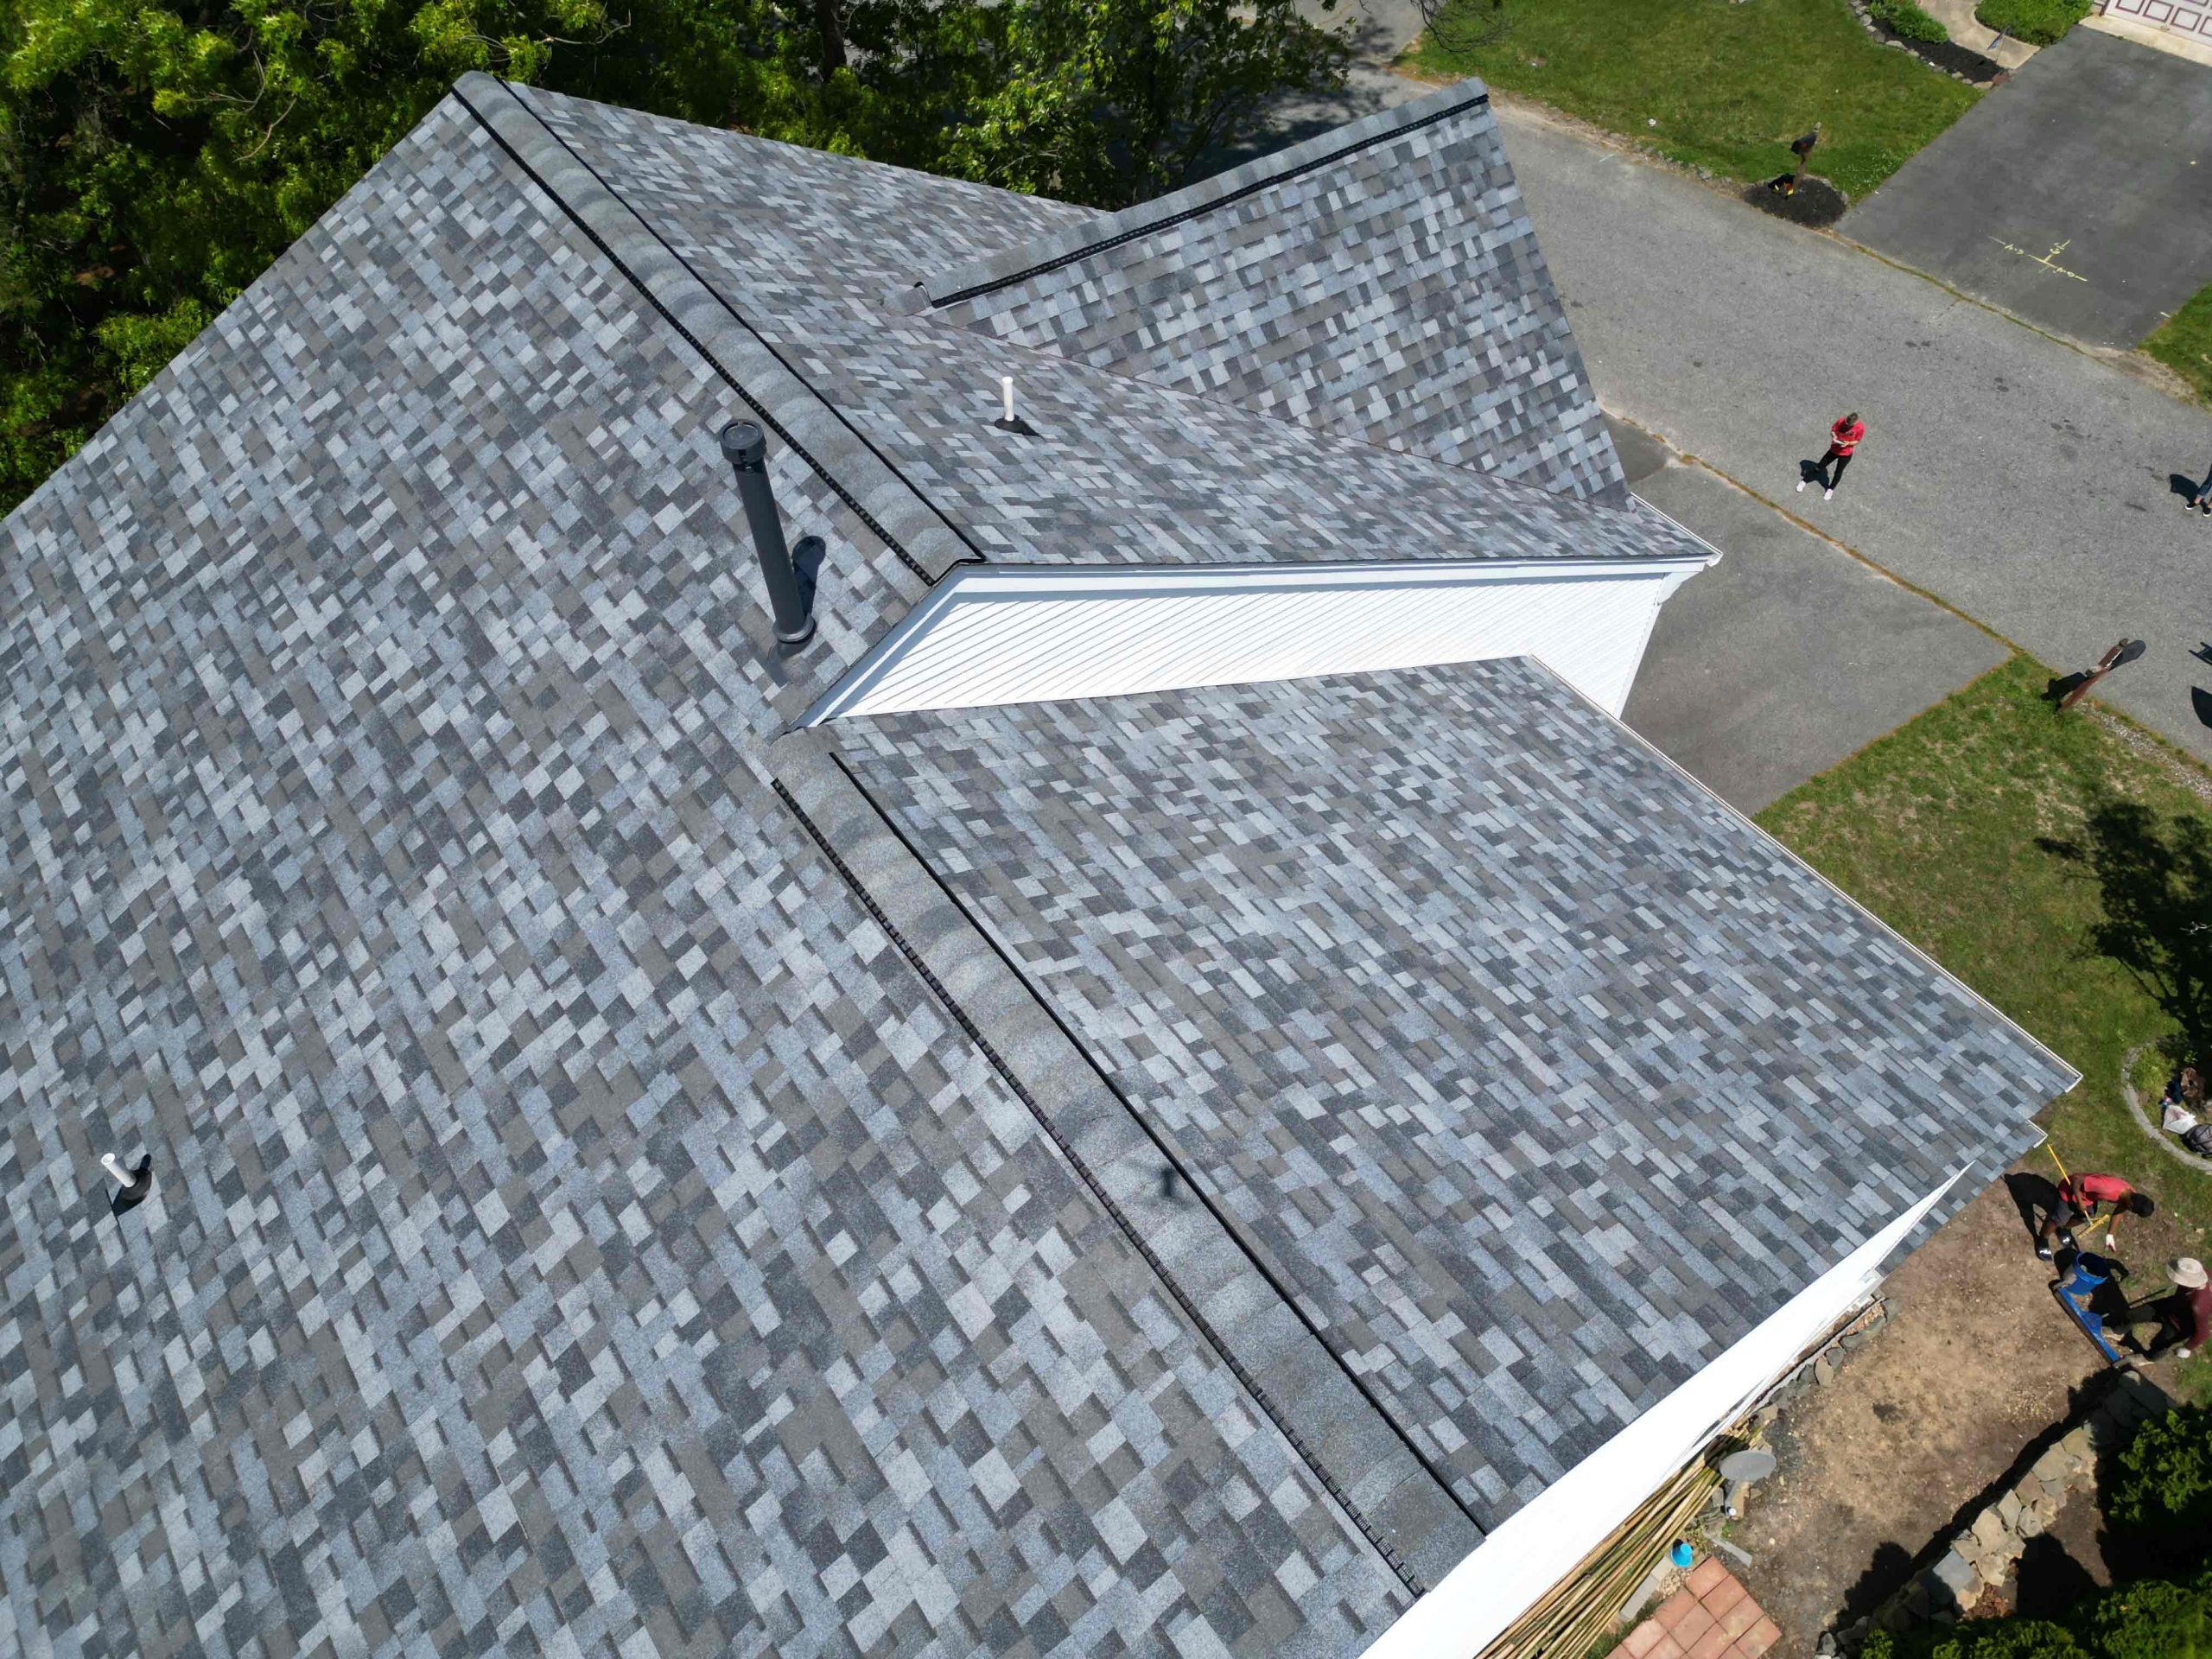 What style of roof do you want?